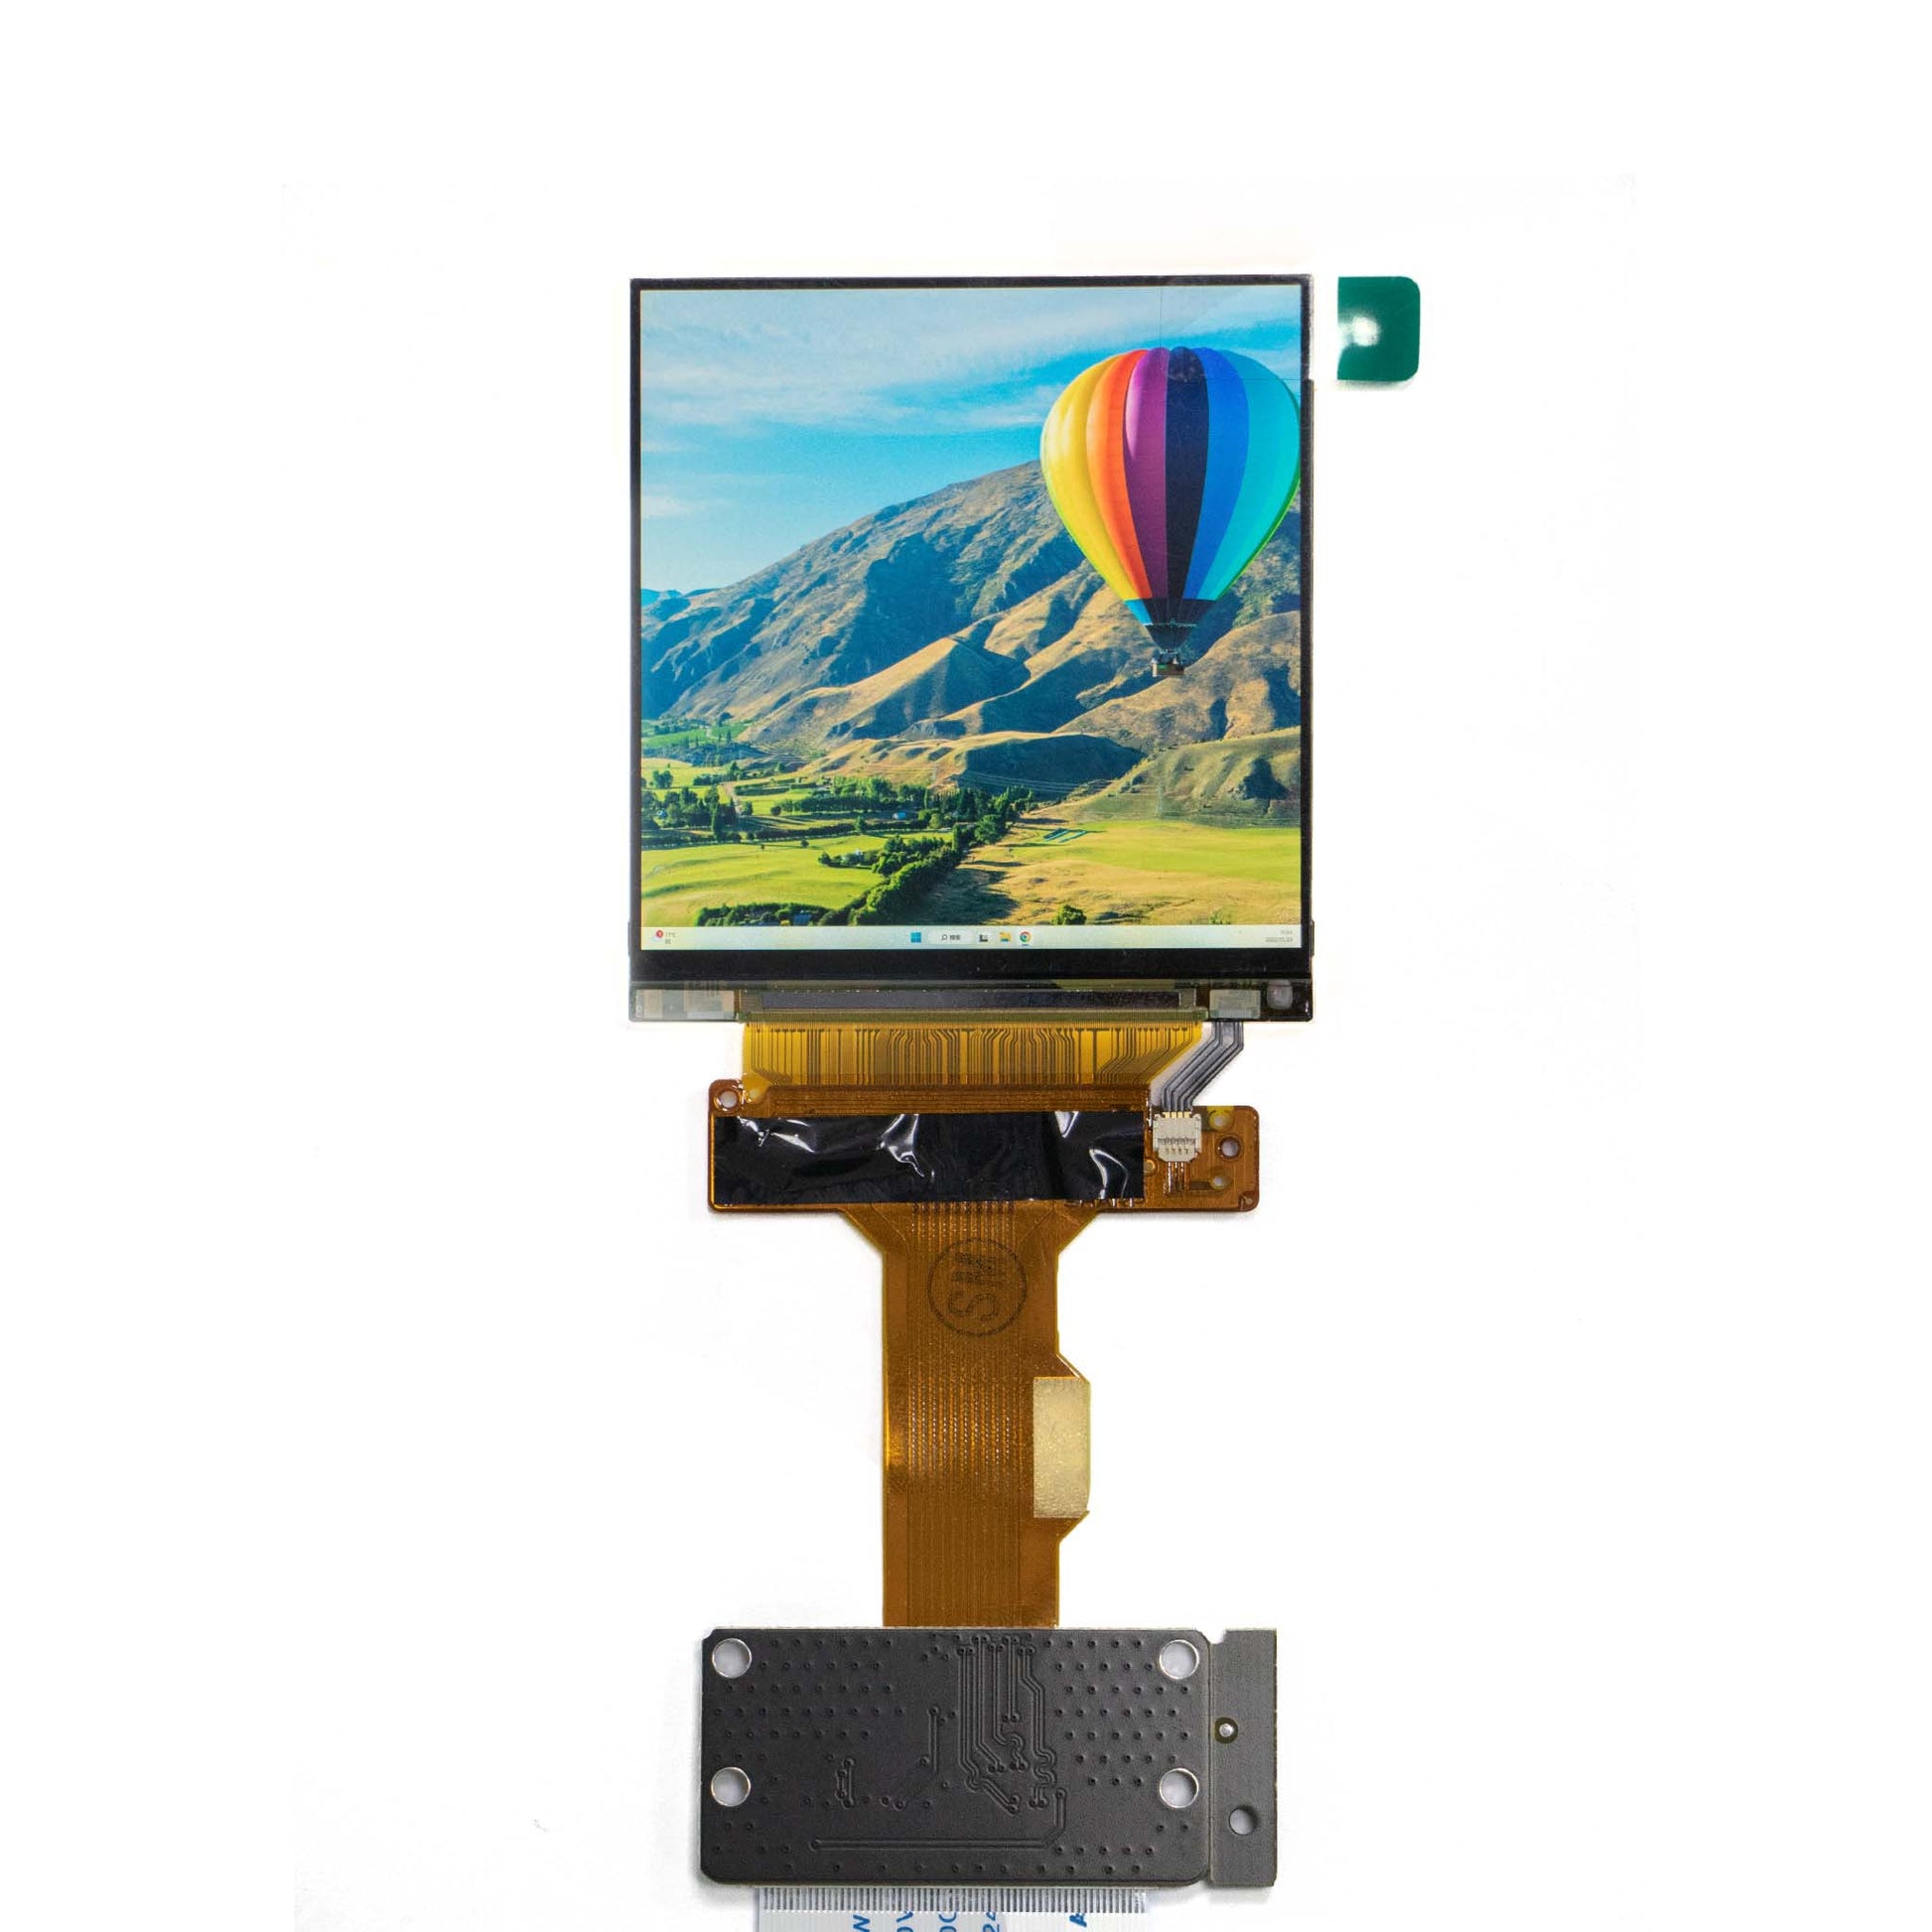 2.89 inch Sharp Display Panel with a high resolution of 1440x1440, designed specifically for VR applications, utilizing MIPI interface